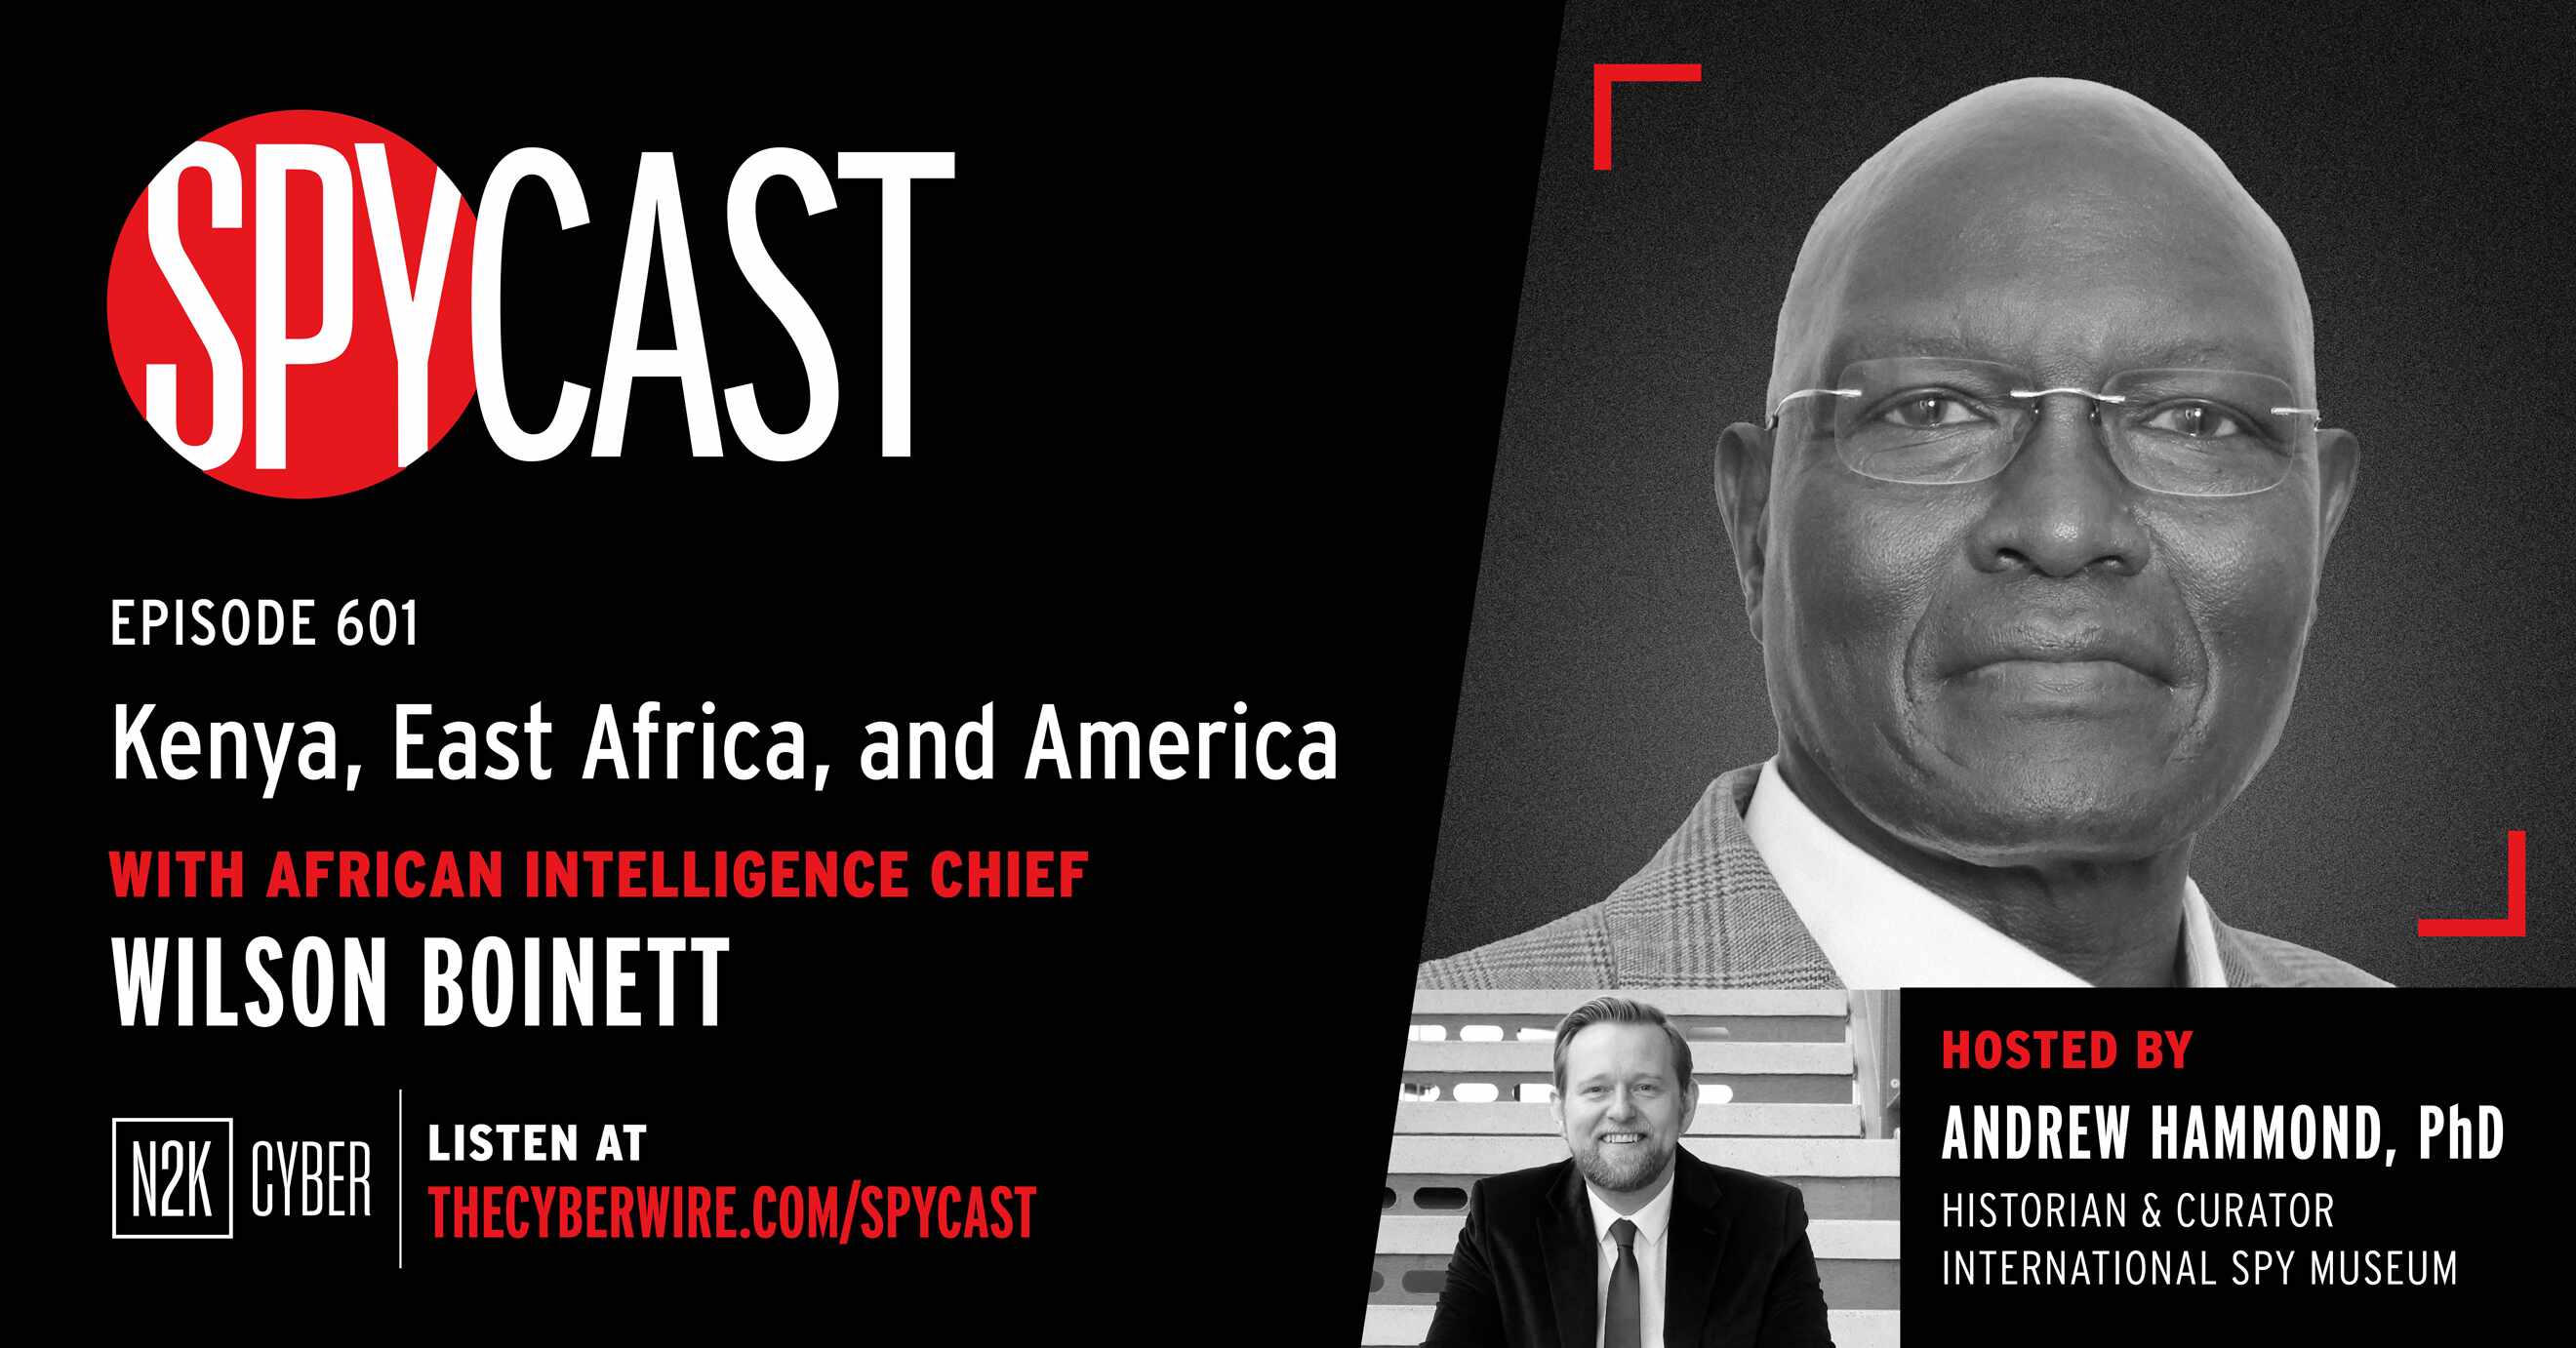 “Kenya, East Africa, and America” – with African Intelligence Chief Wilson Boinett